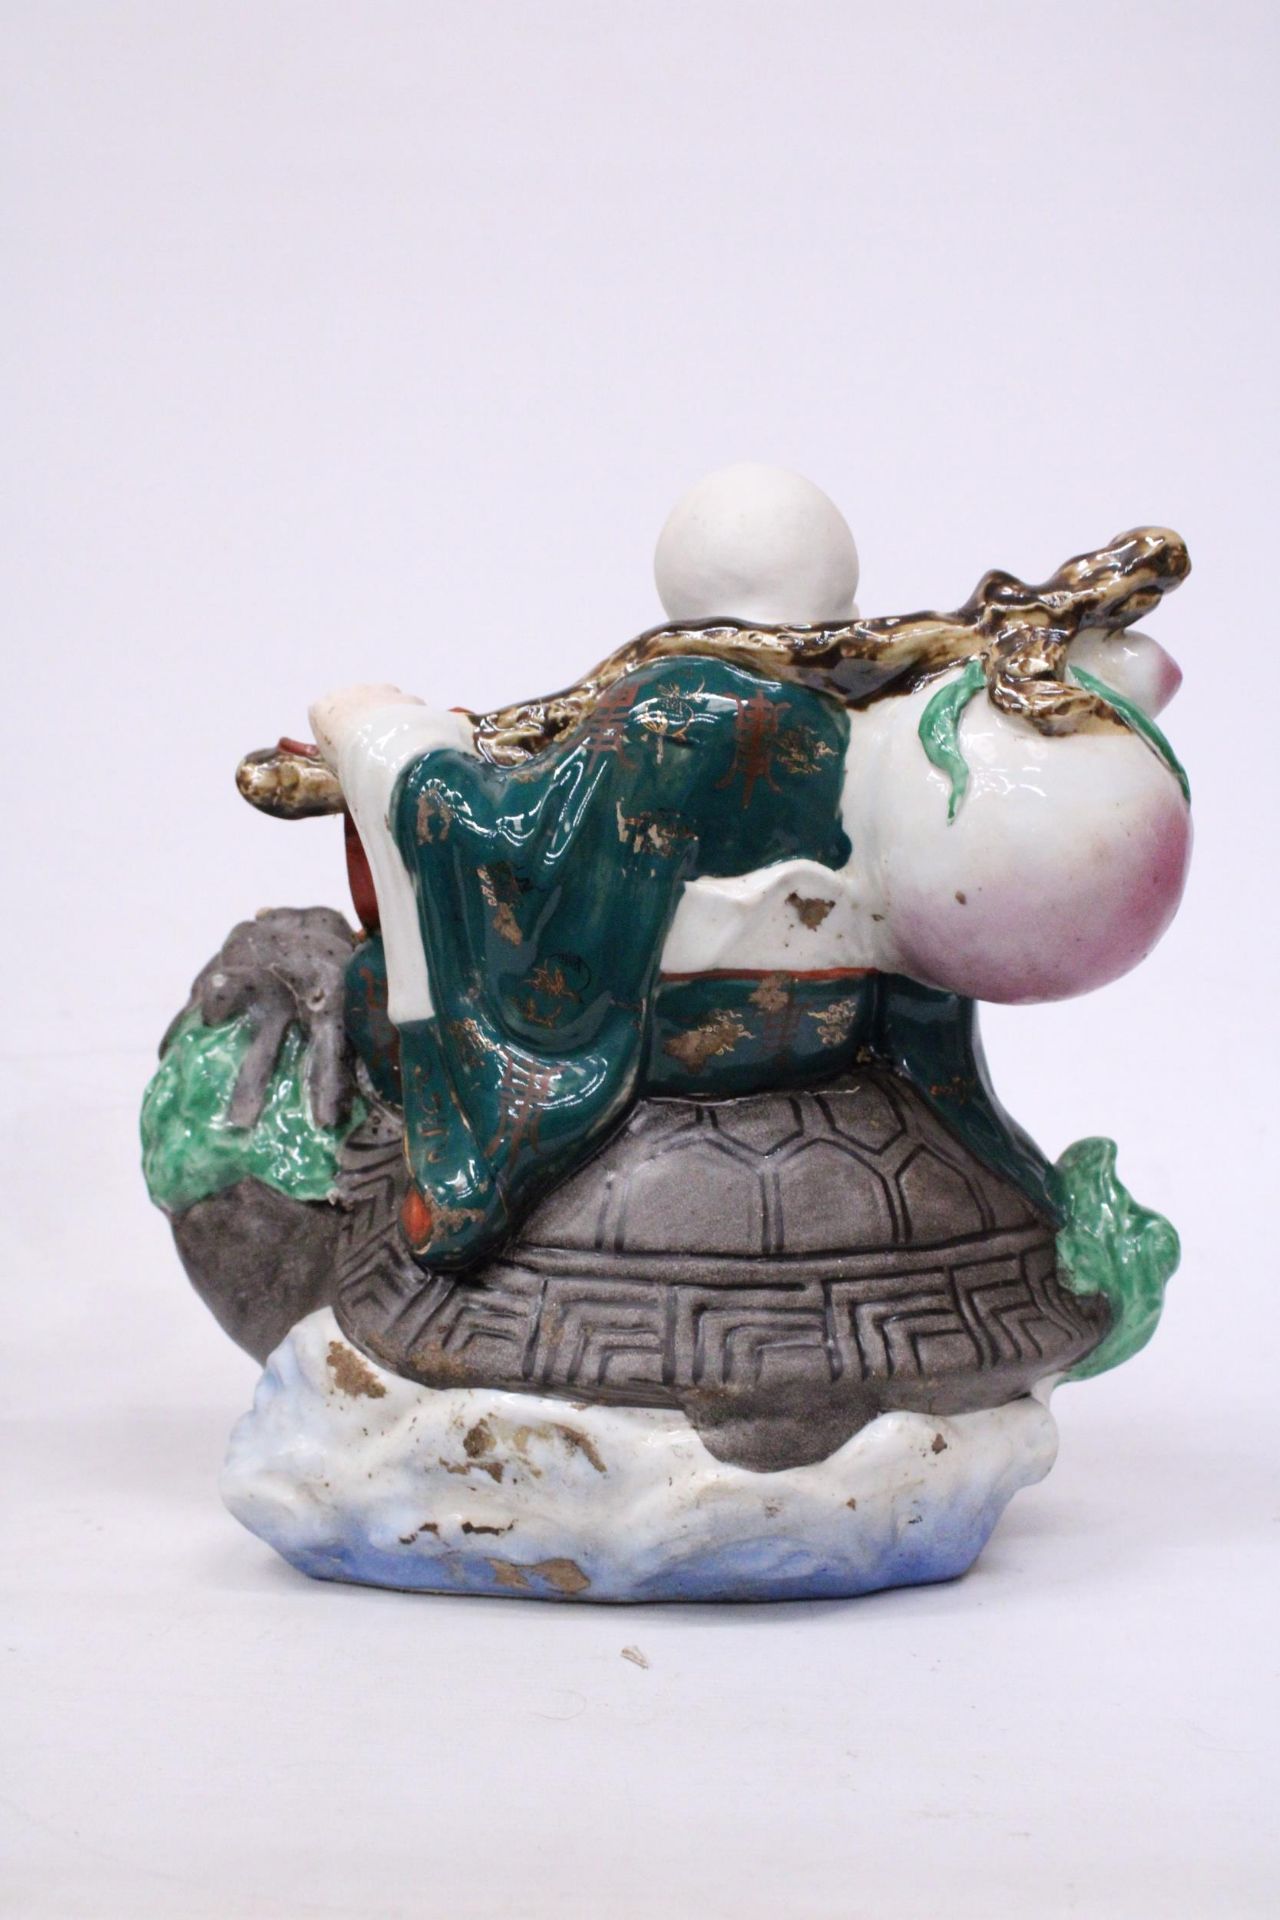 A CHINESE PORCELAIN WISE MAN RIDING A DRAGON TURTLE - Image 4 of 7